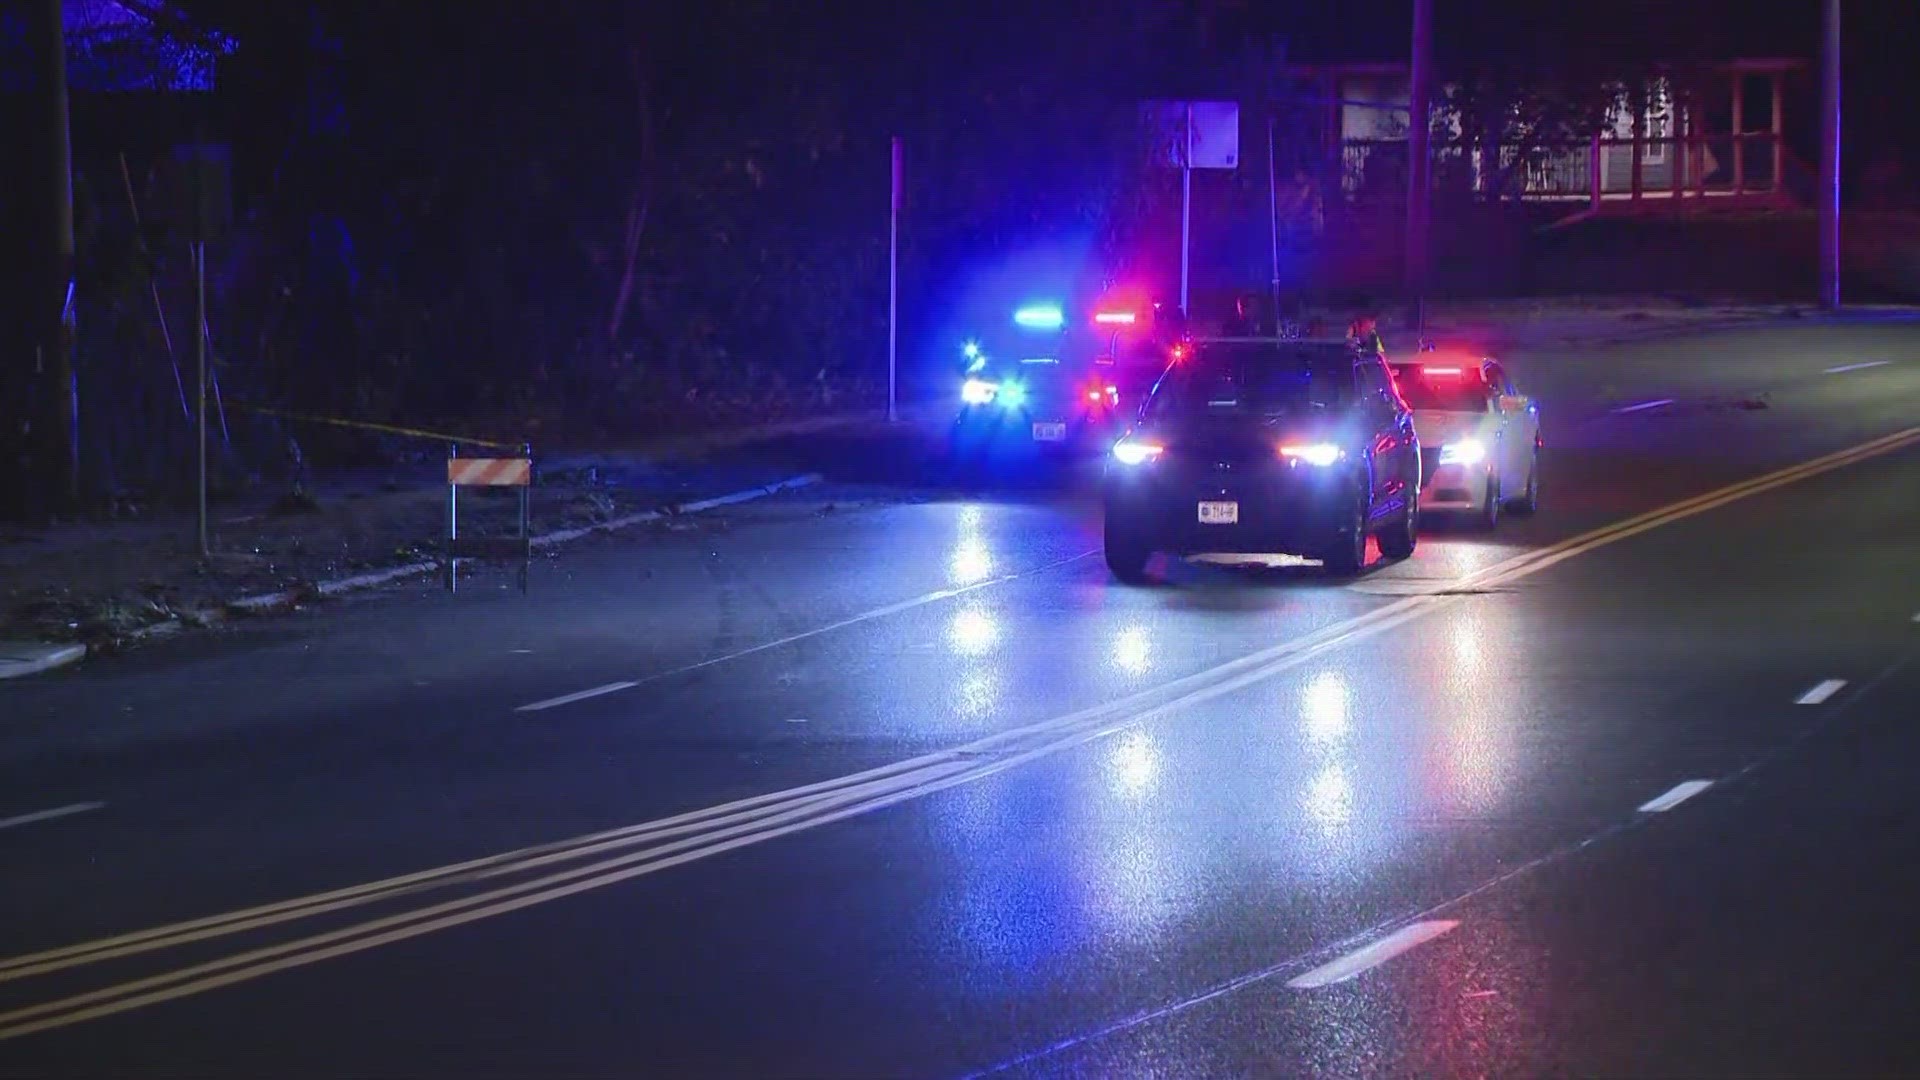 A crash in north St. Louis County left one person dead early Friday morning. It happened at about 3:45 a.m. Friday on North Clay Avenue in Ferugson.